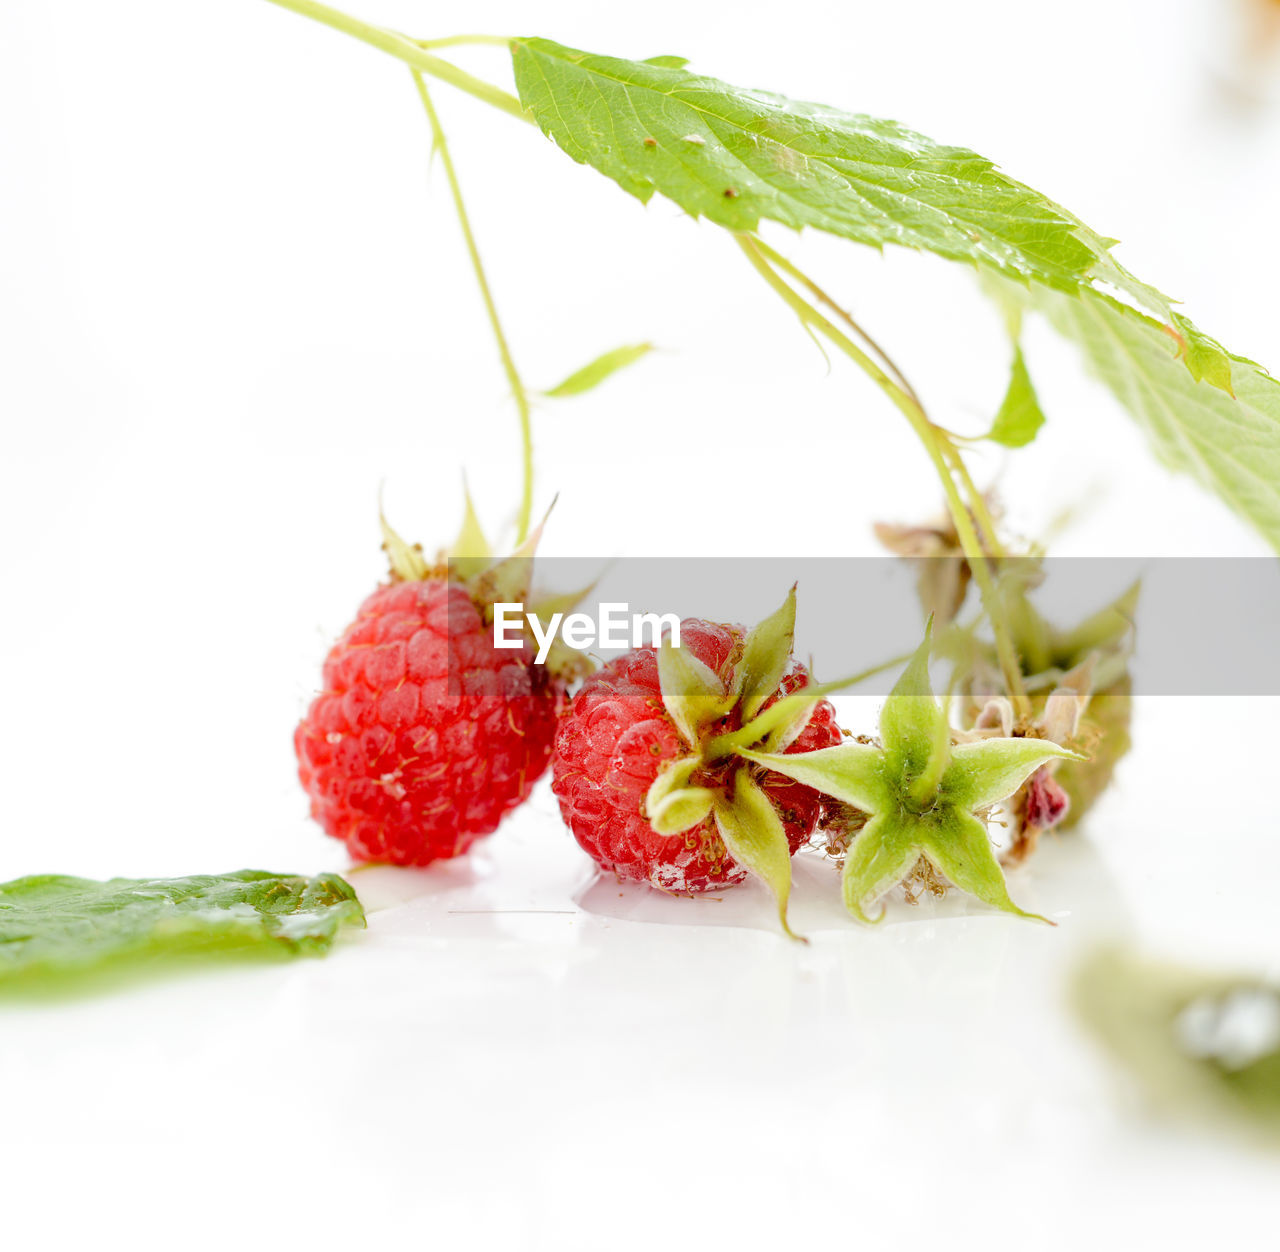 Close-up of raspberries on white background